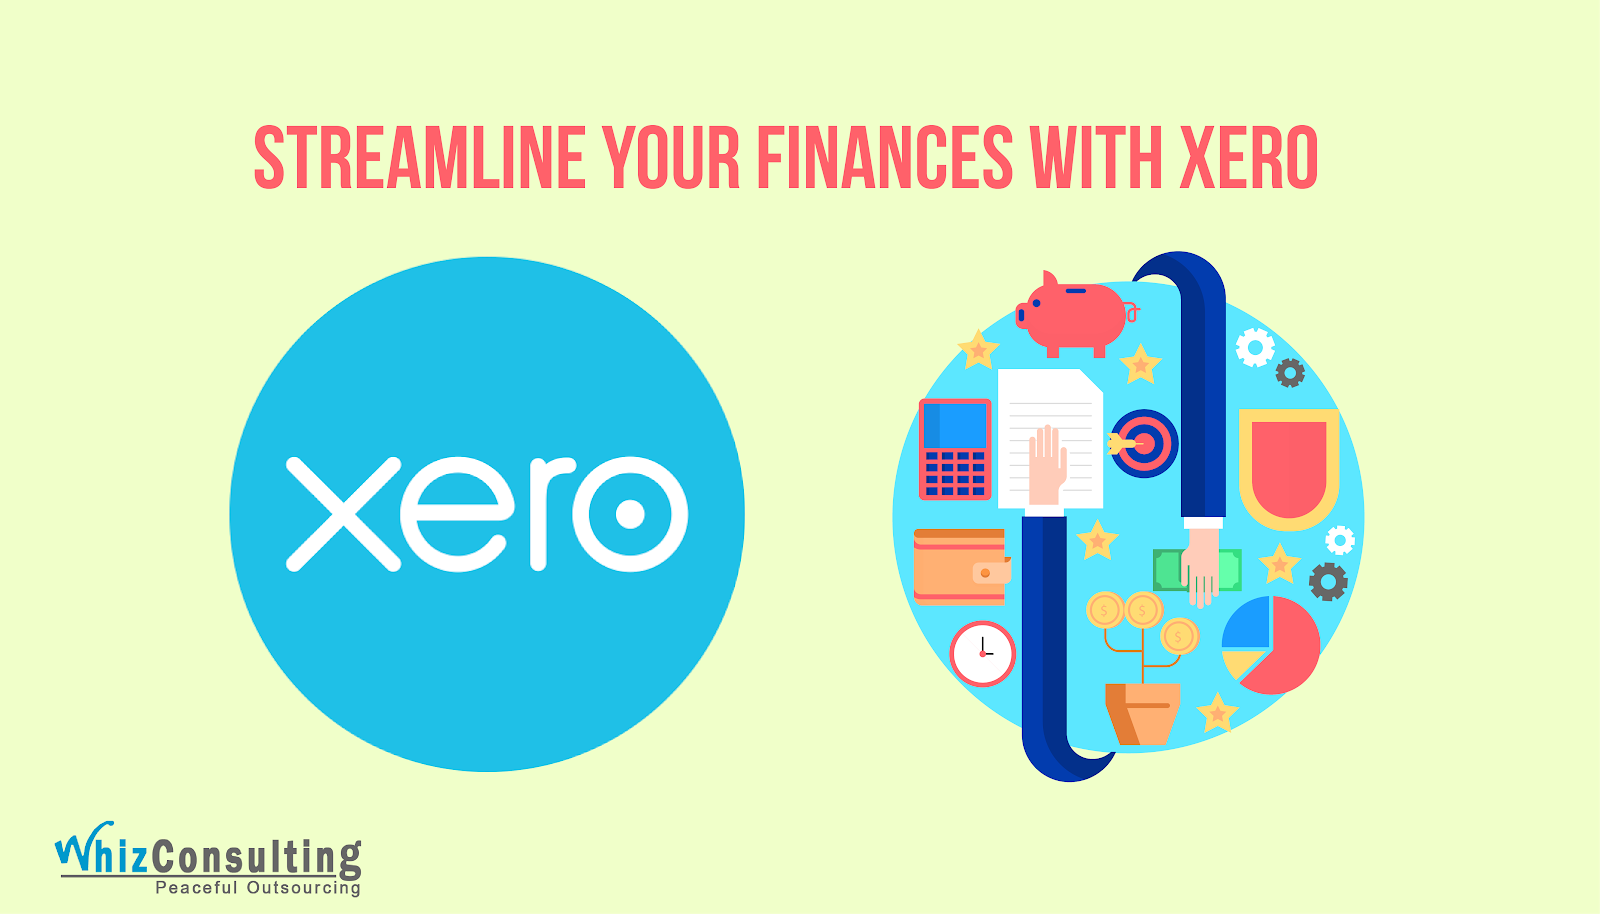 Why Use Xero Accounting Software: Streamline Your Finances Effortlessly